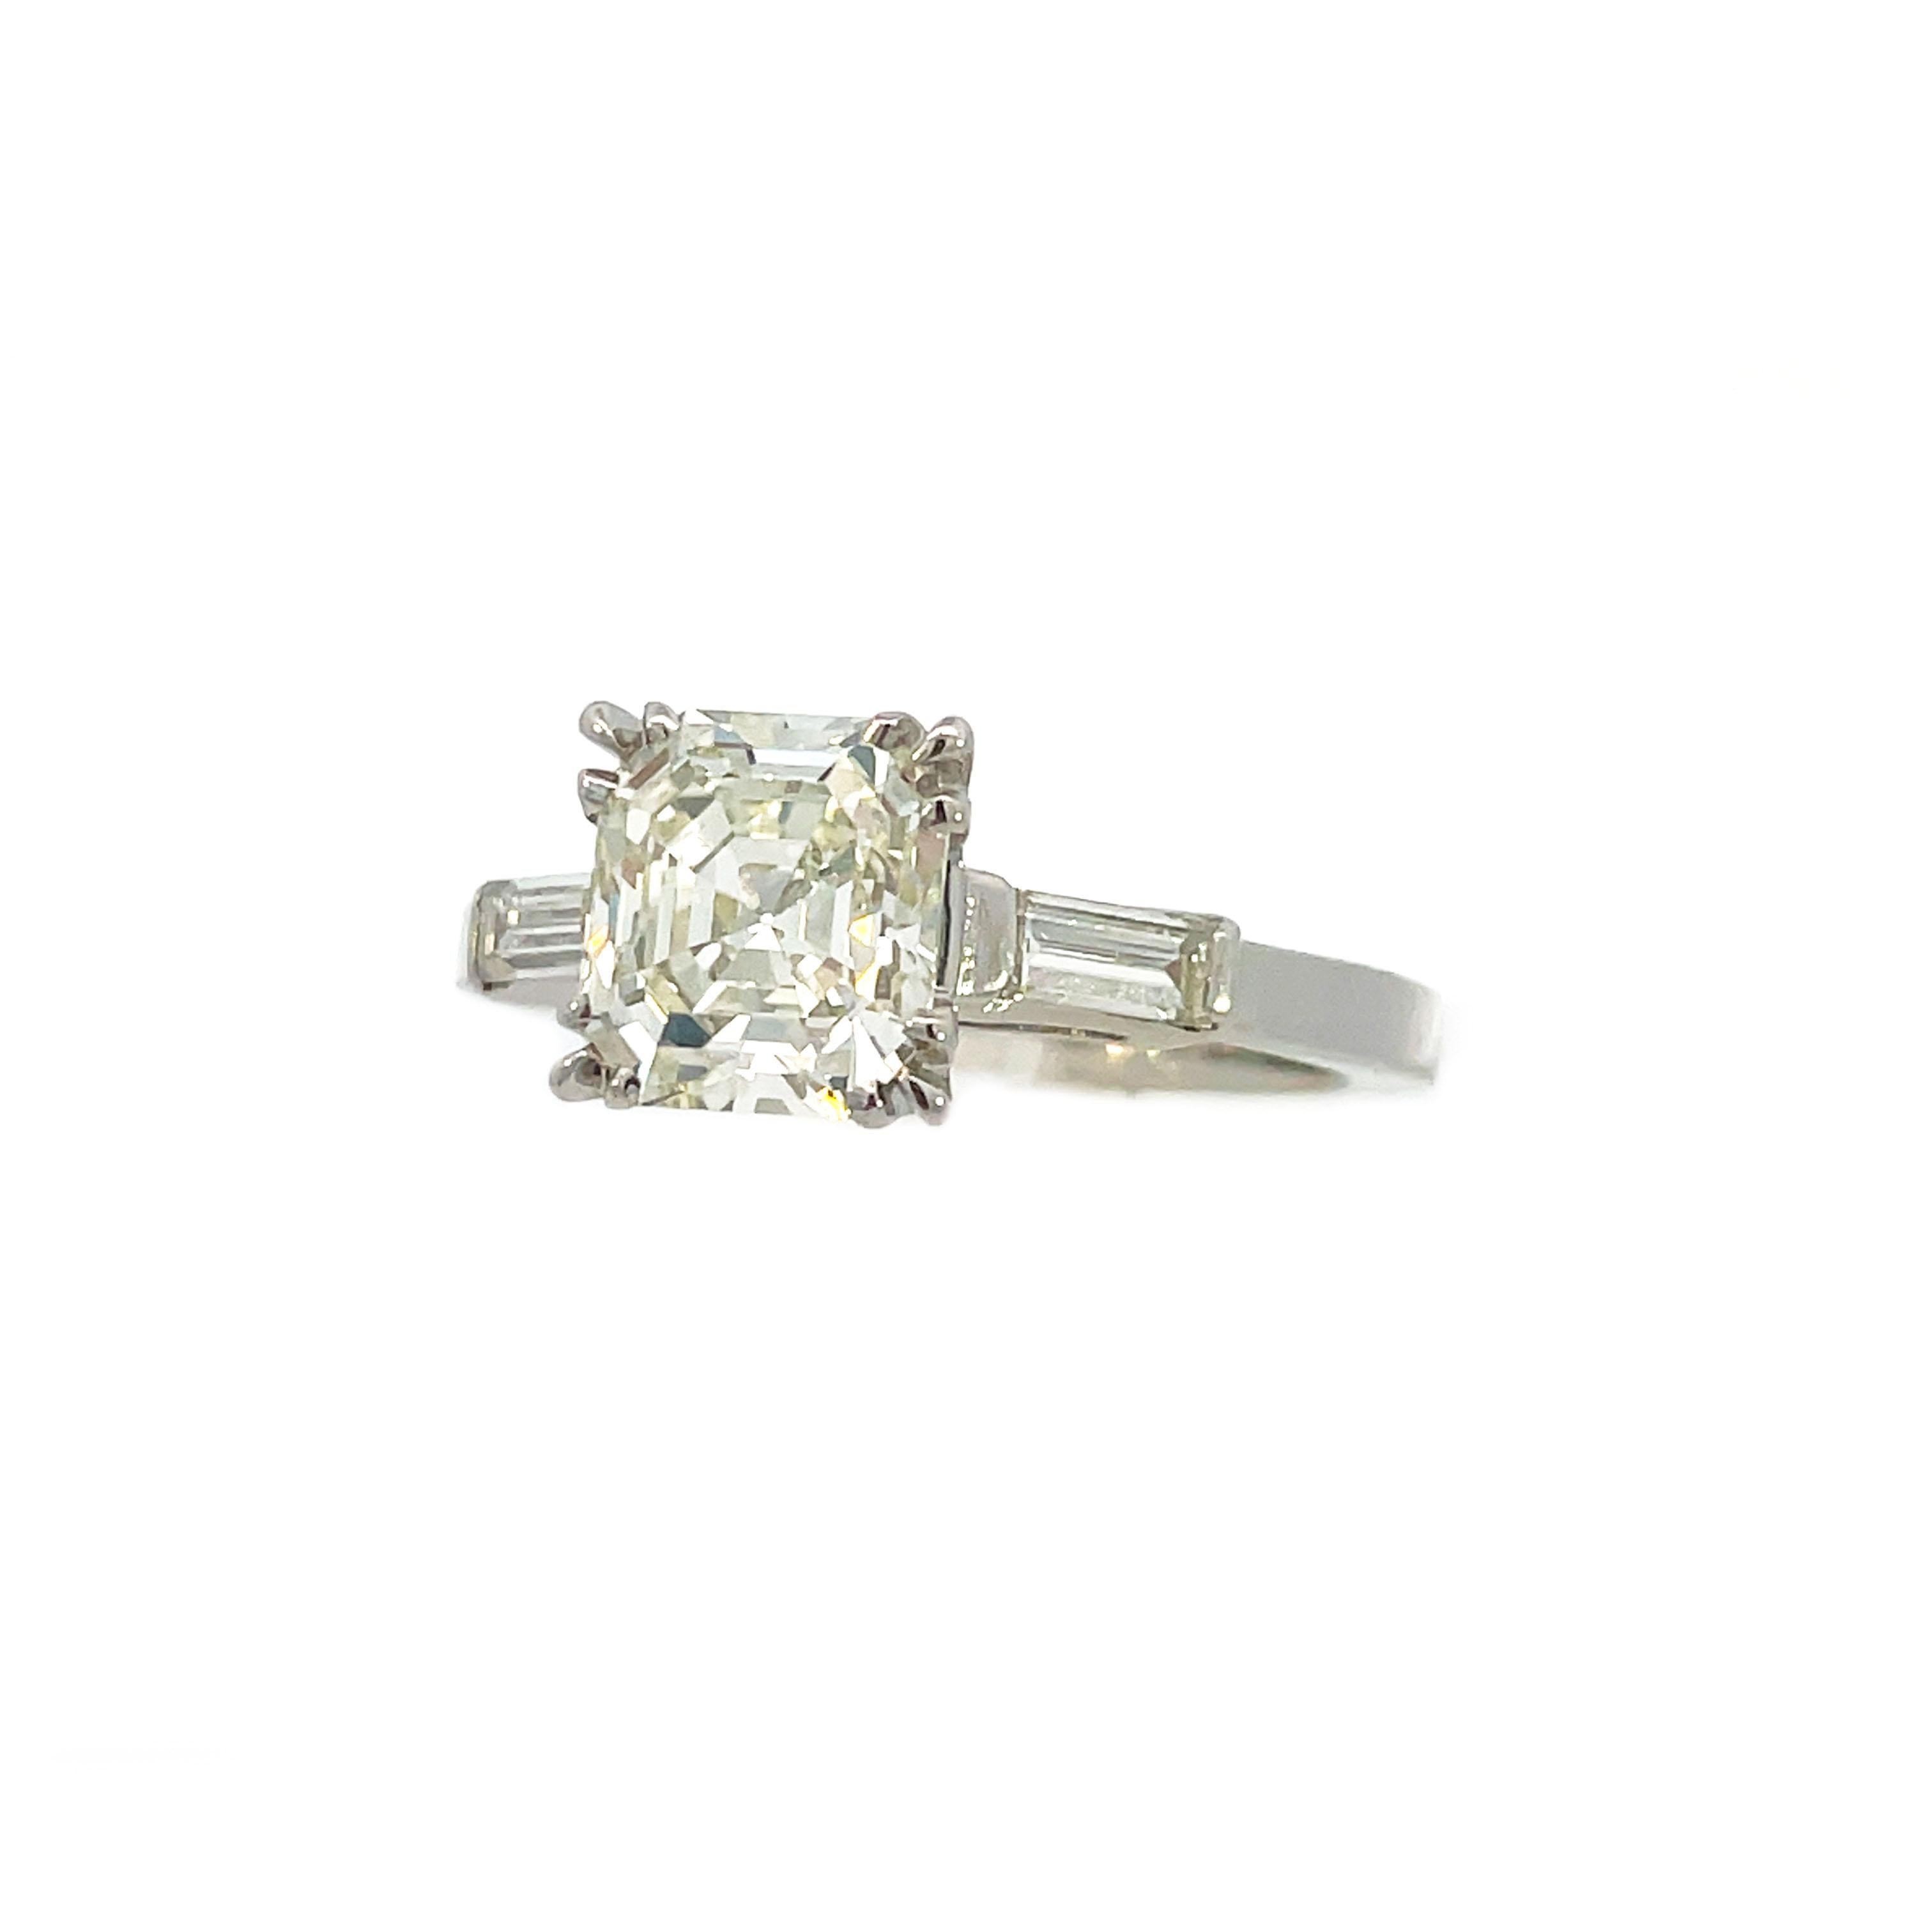 Women's 1925 Art Deco Platinum Asscher and Baguette Diamond Ring with GIA Report For Sale